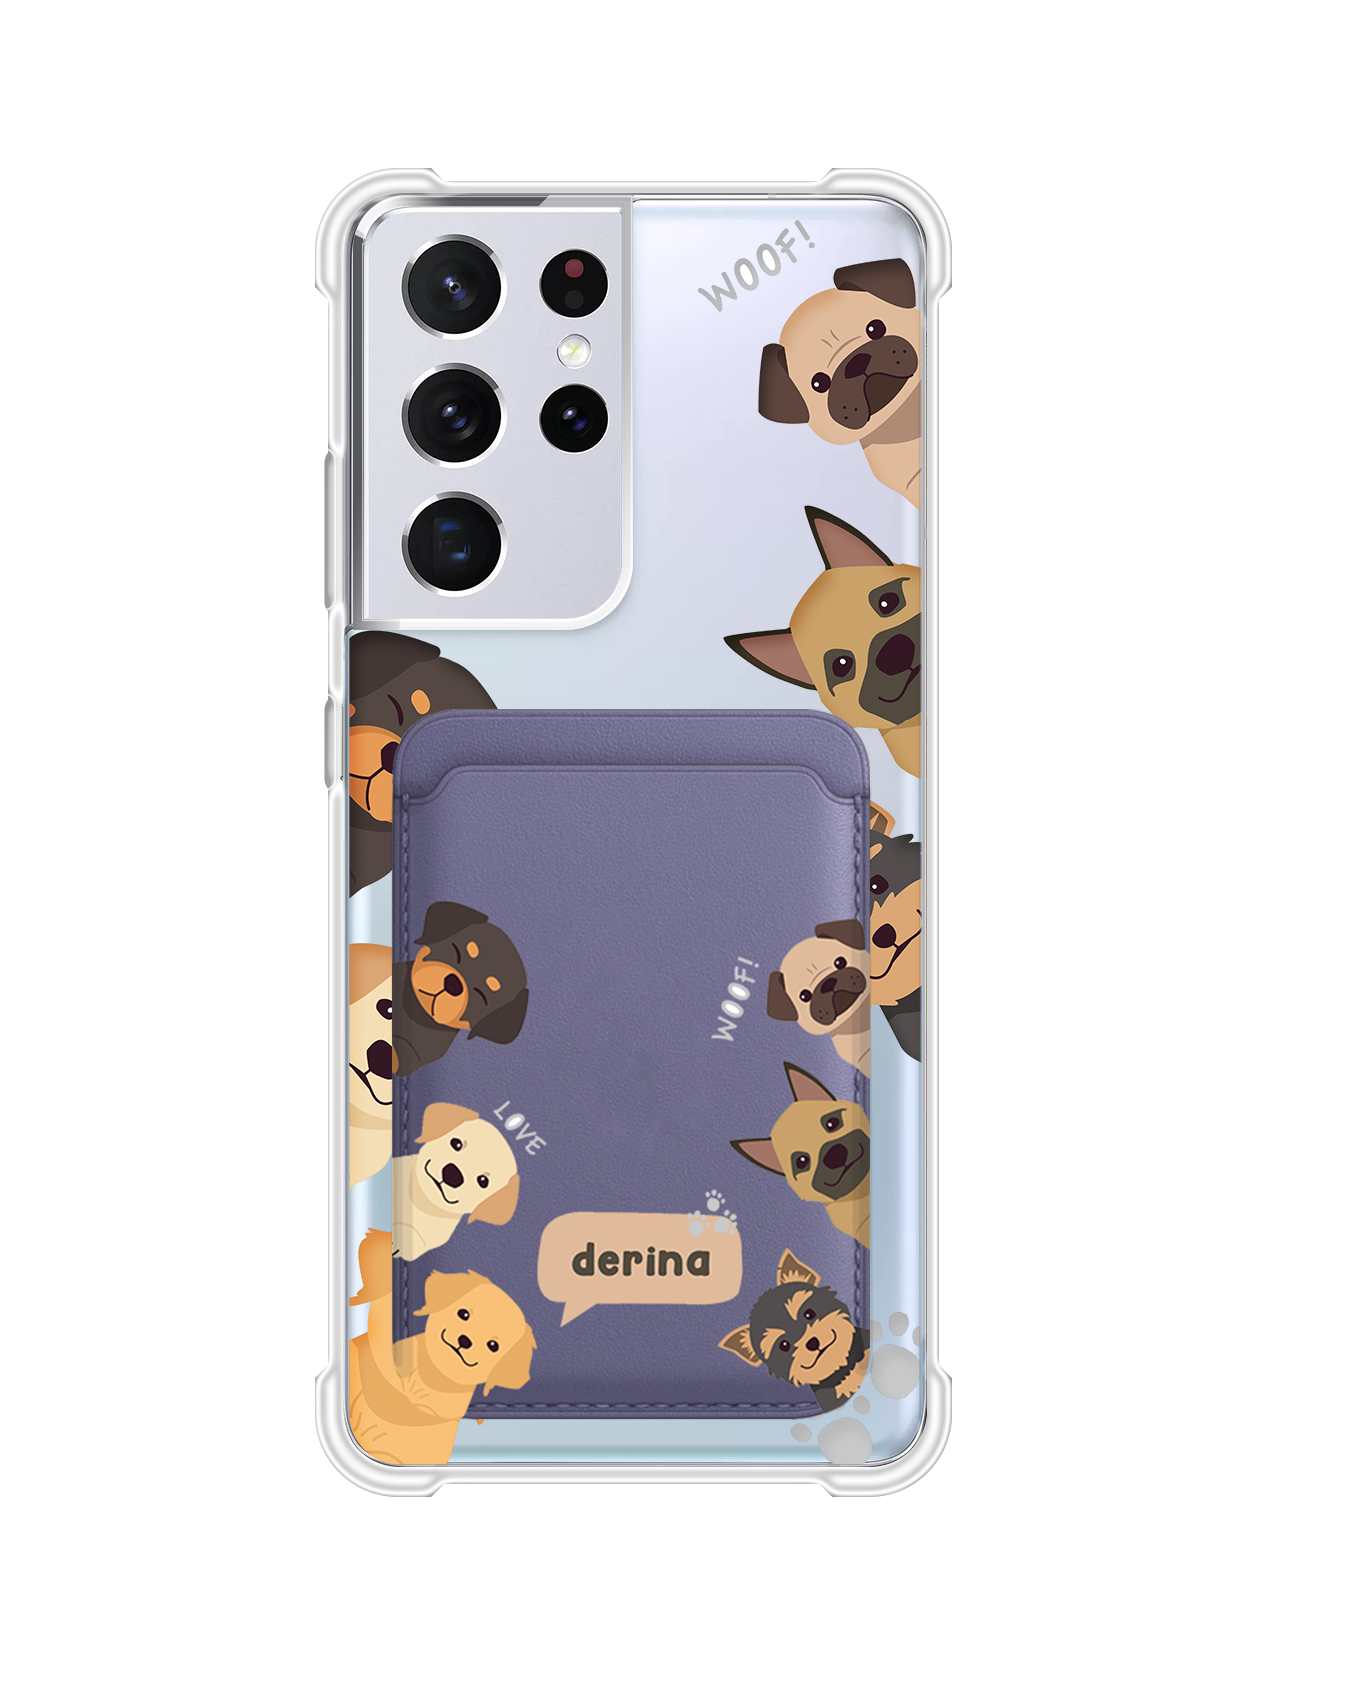 Android Magnetic Wallet Case - Ruff Family 1.0